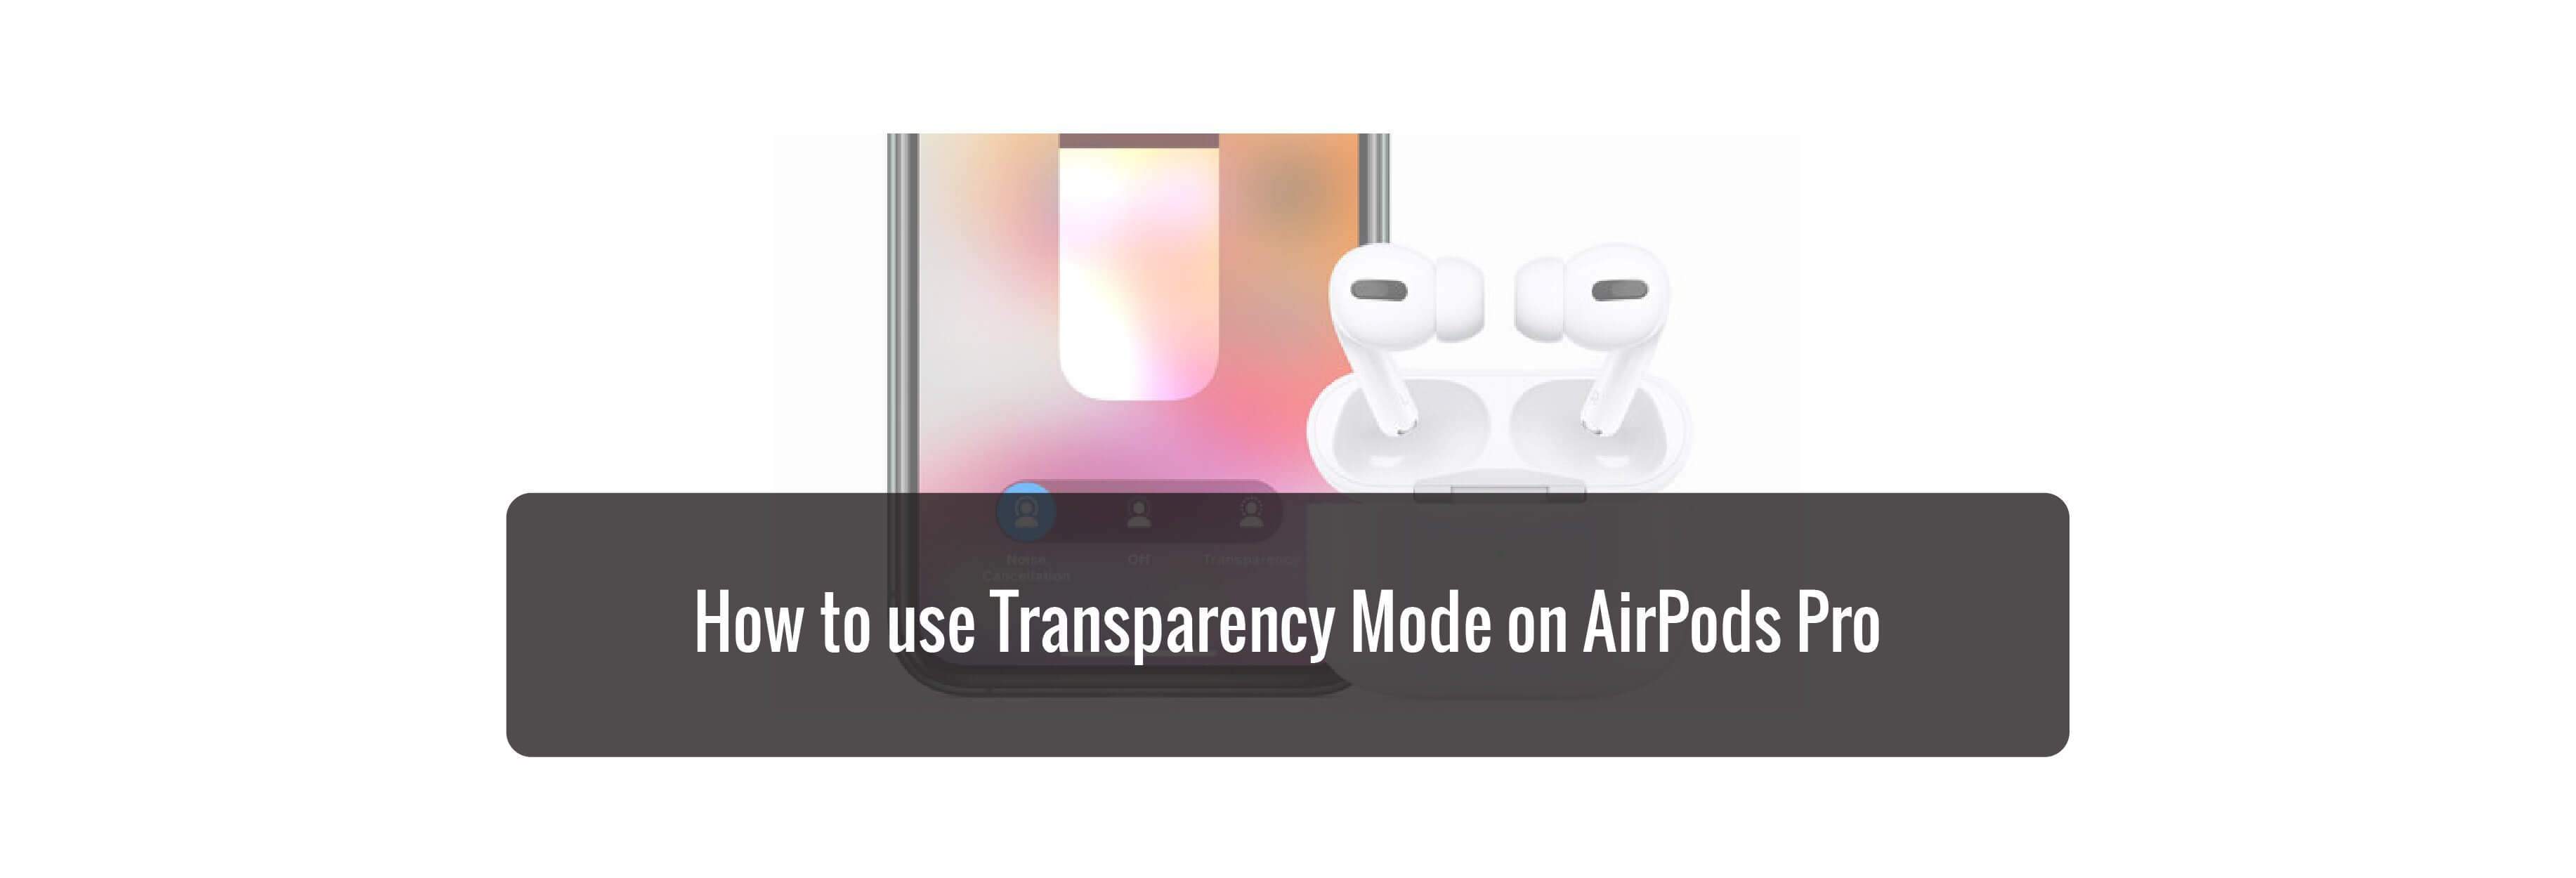 How to use Transparency Mode on AirPods Pro